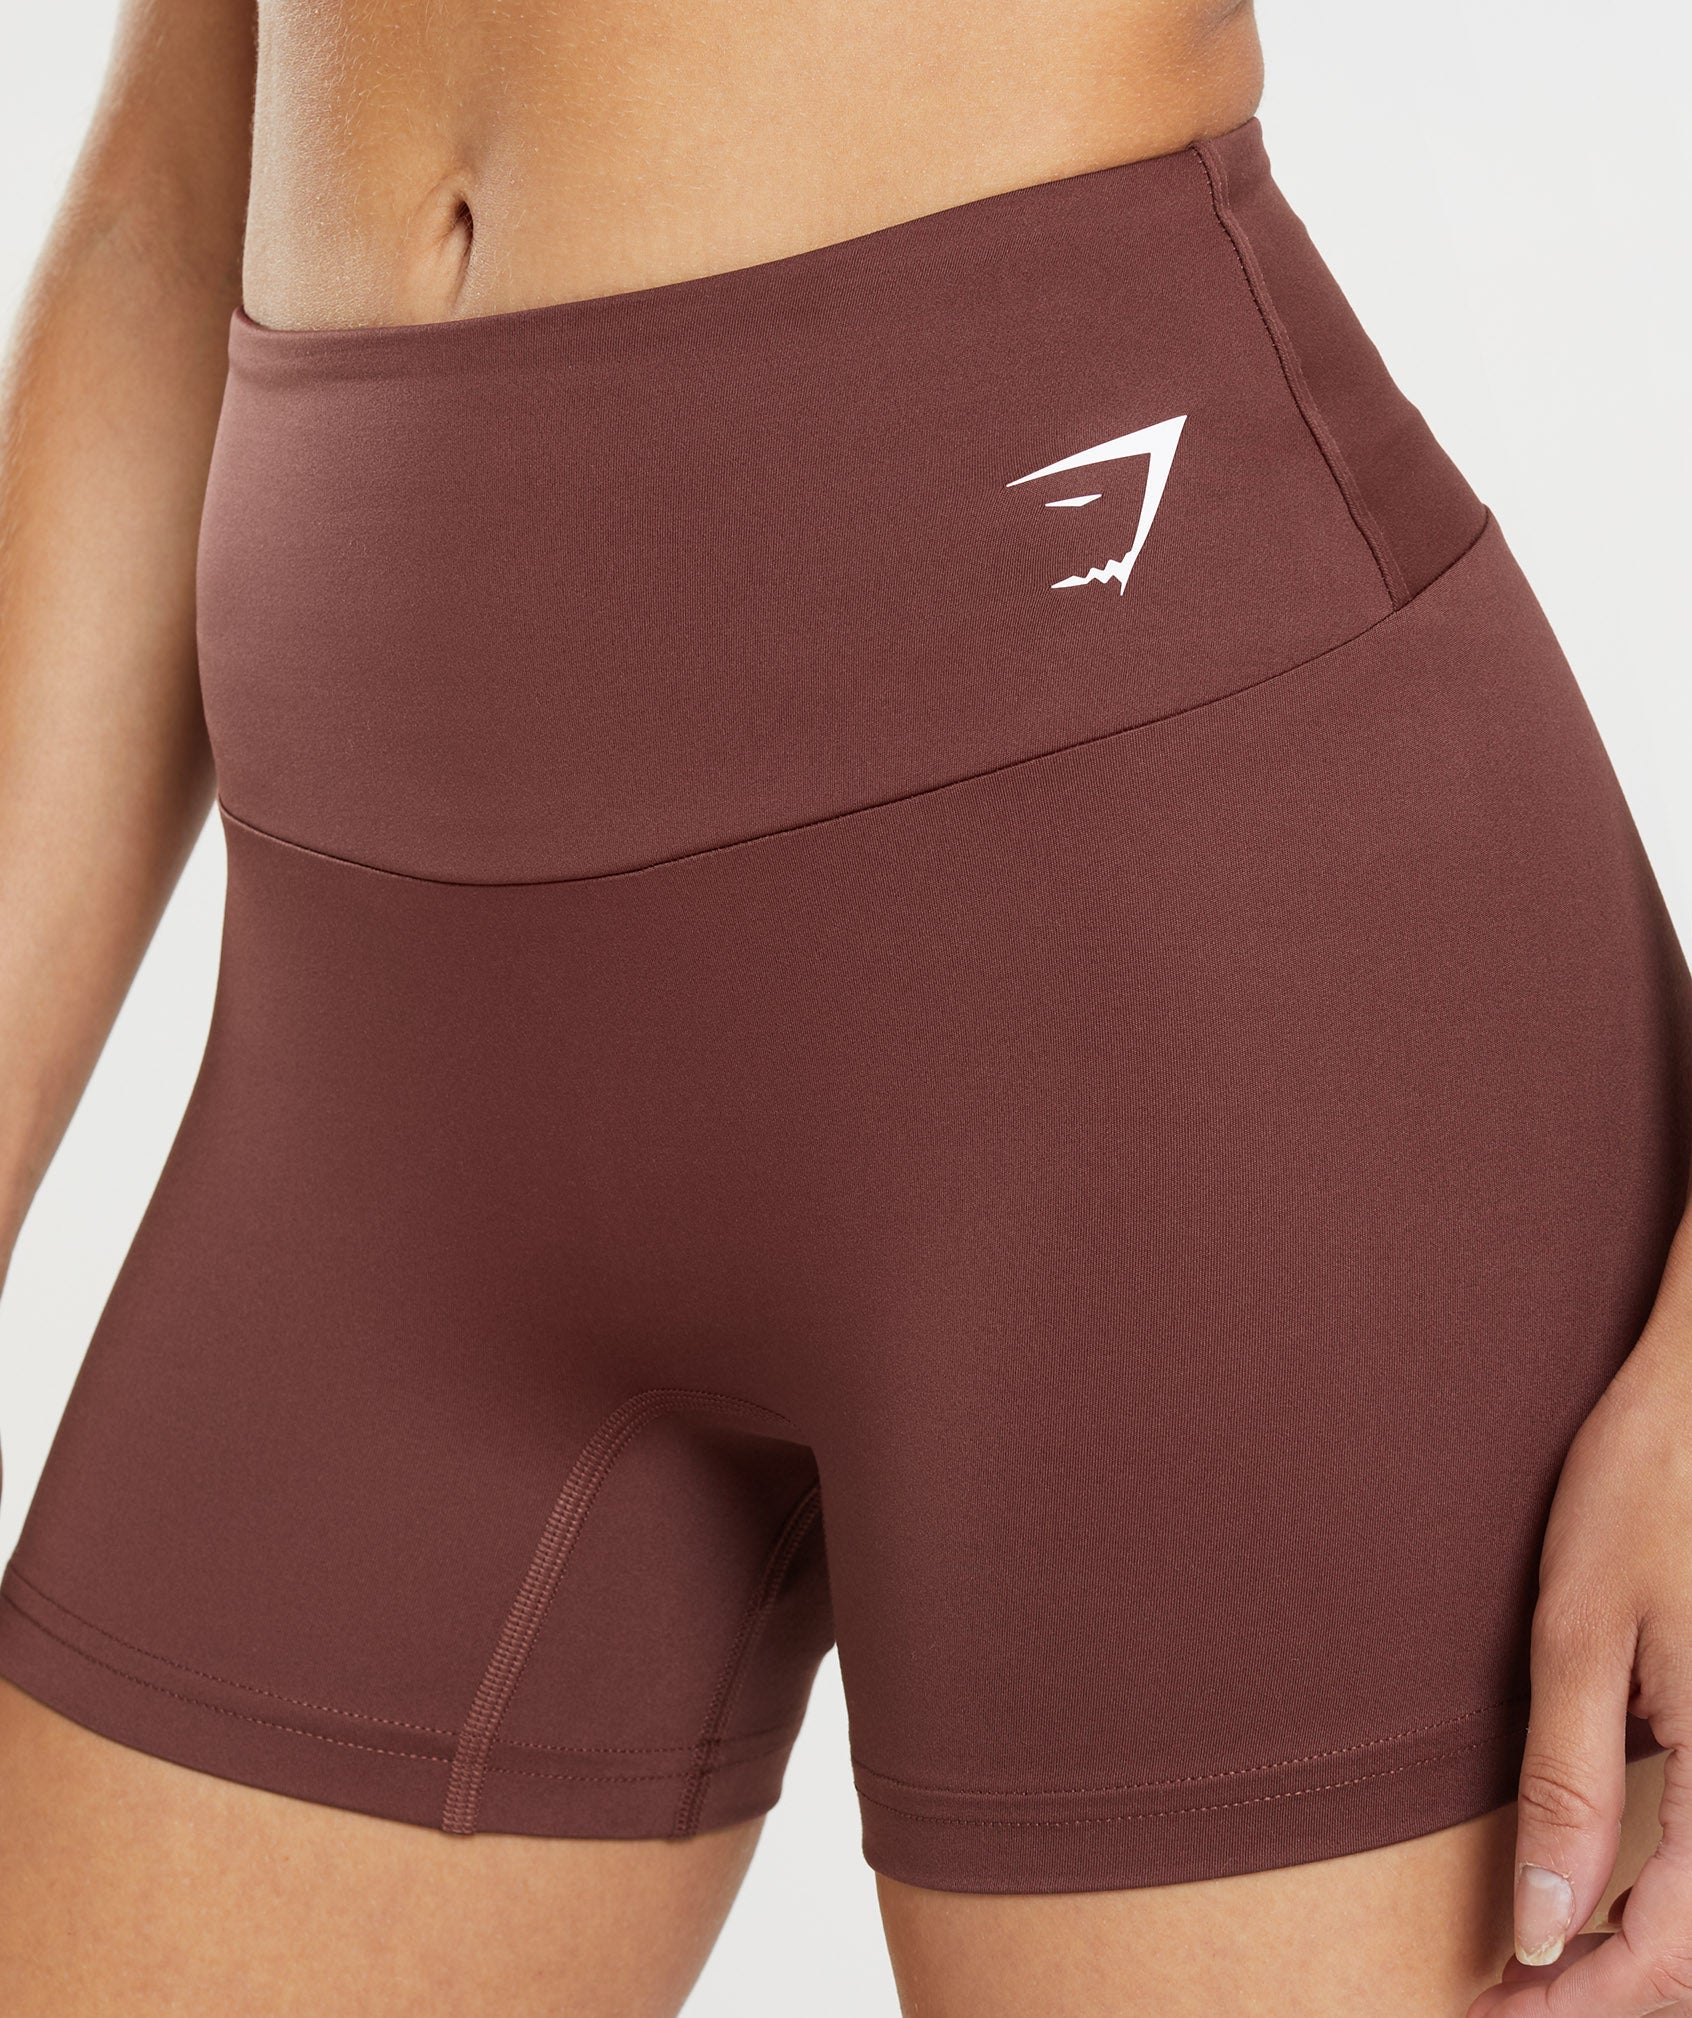 Gymshark Training Shorts Purple - $18 (35% Off Retail) - From brooke